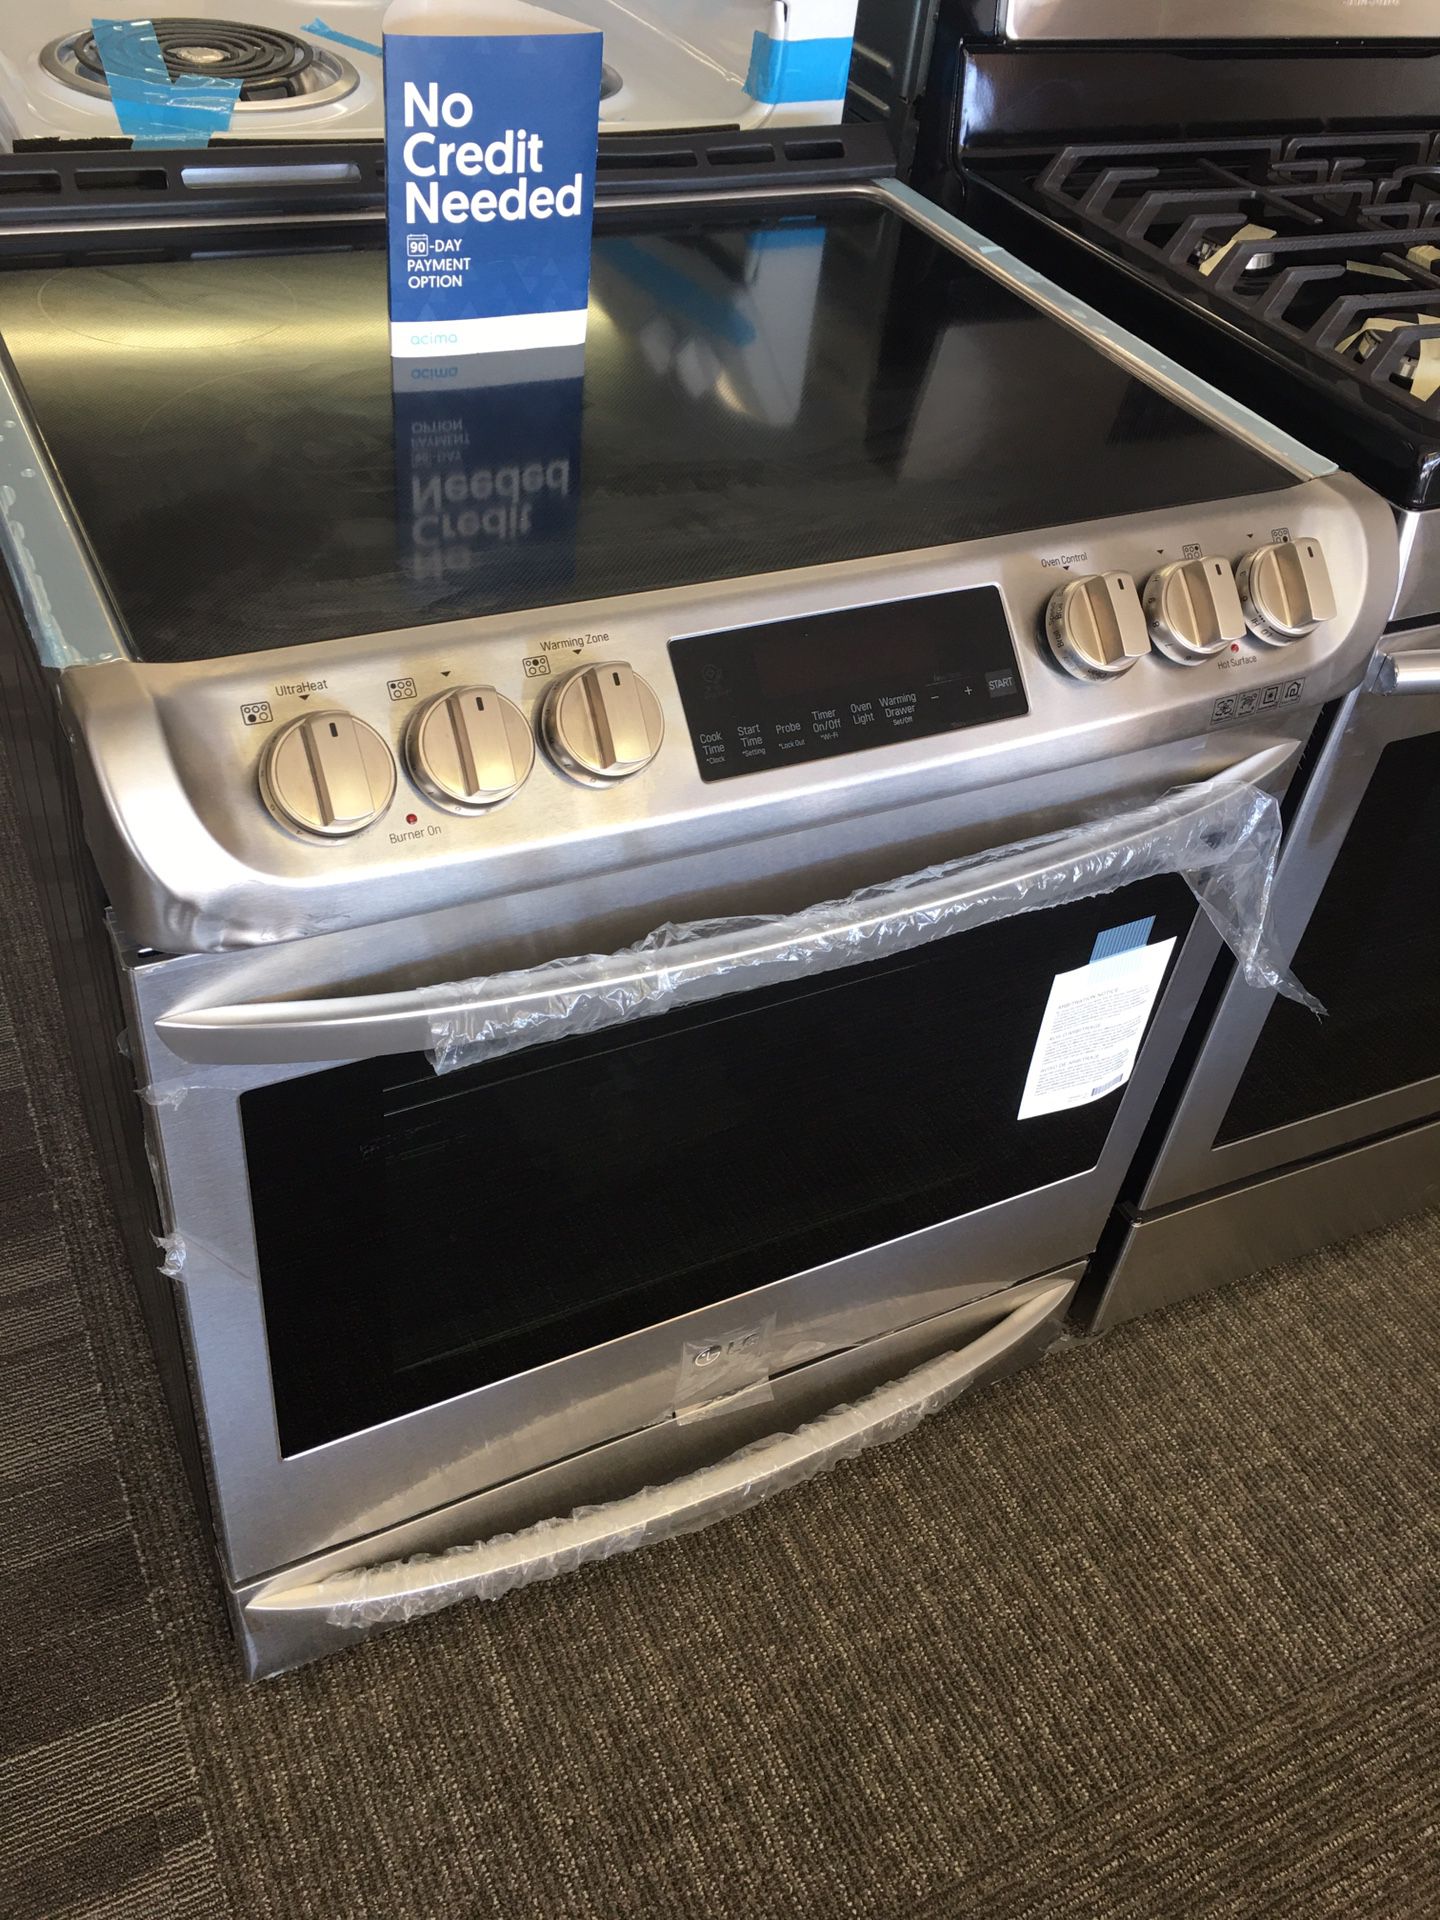 LG Stainless Steel Slide-In Electric Stove With Warranty No Credit Check Just $79 Down Payment Cash Price $1,500